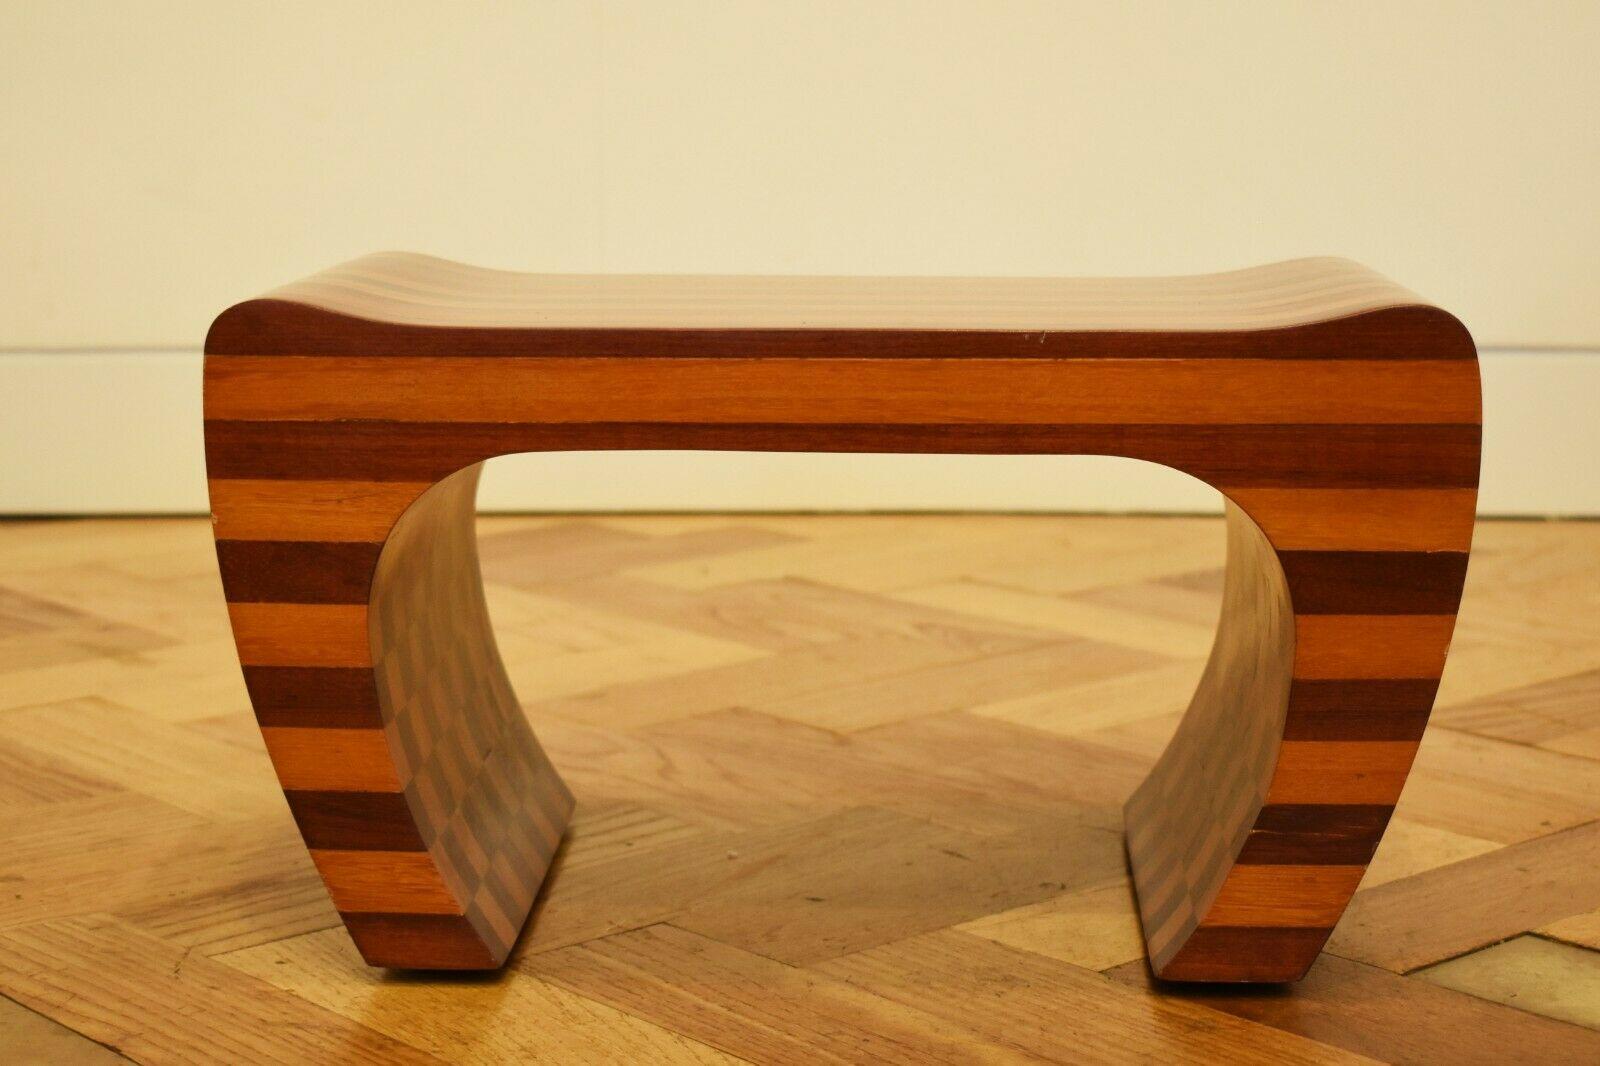 Modern Amazonian Checkered Foot Stool in Madeiras Wood, 1980's For Sale